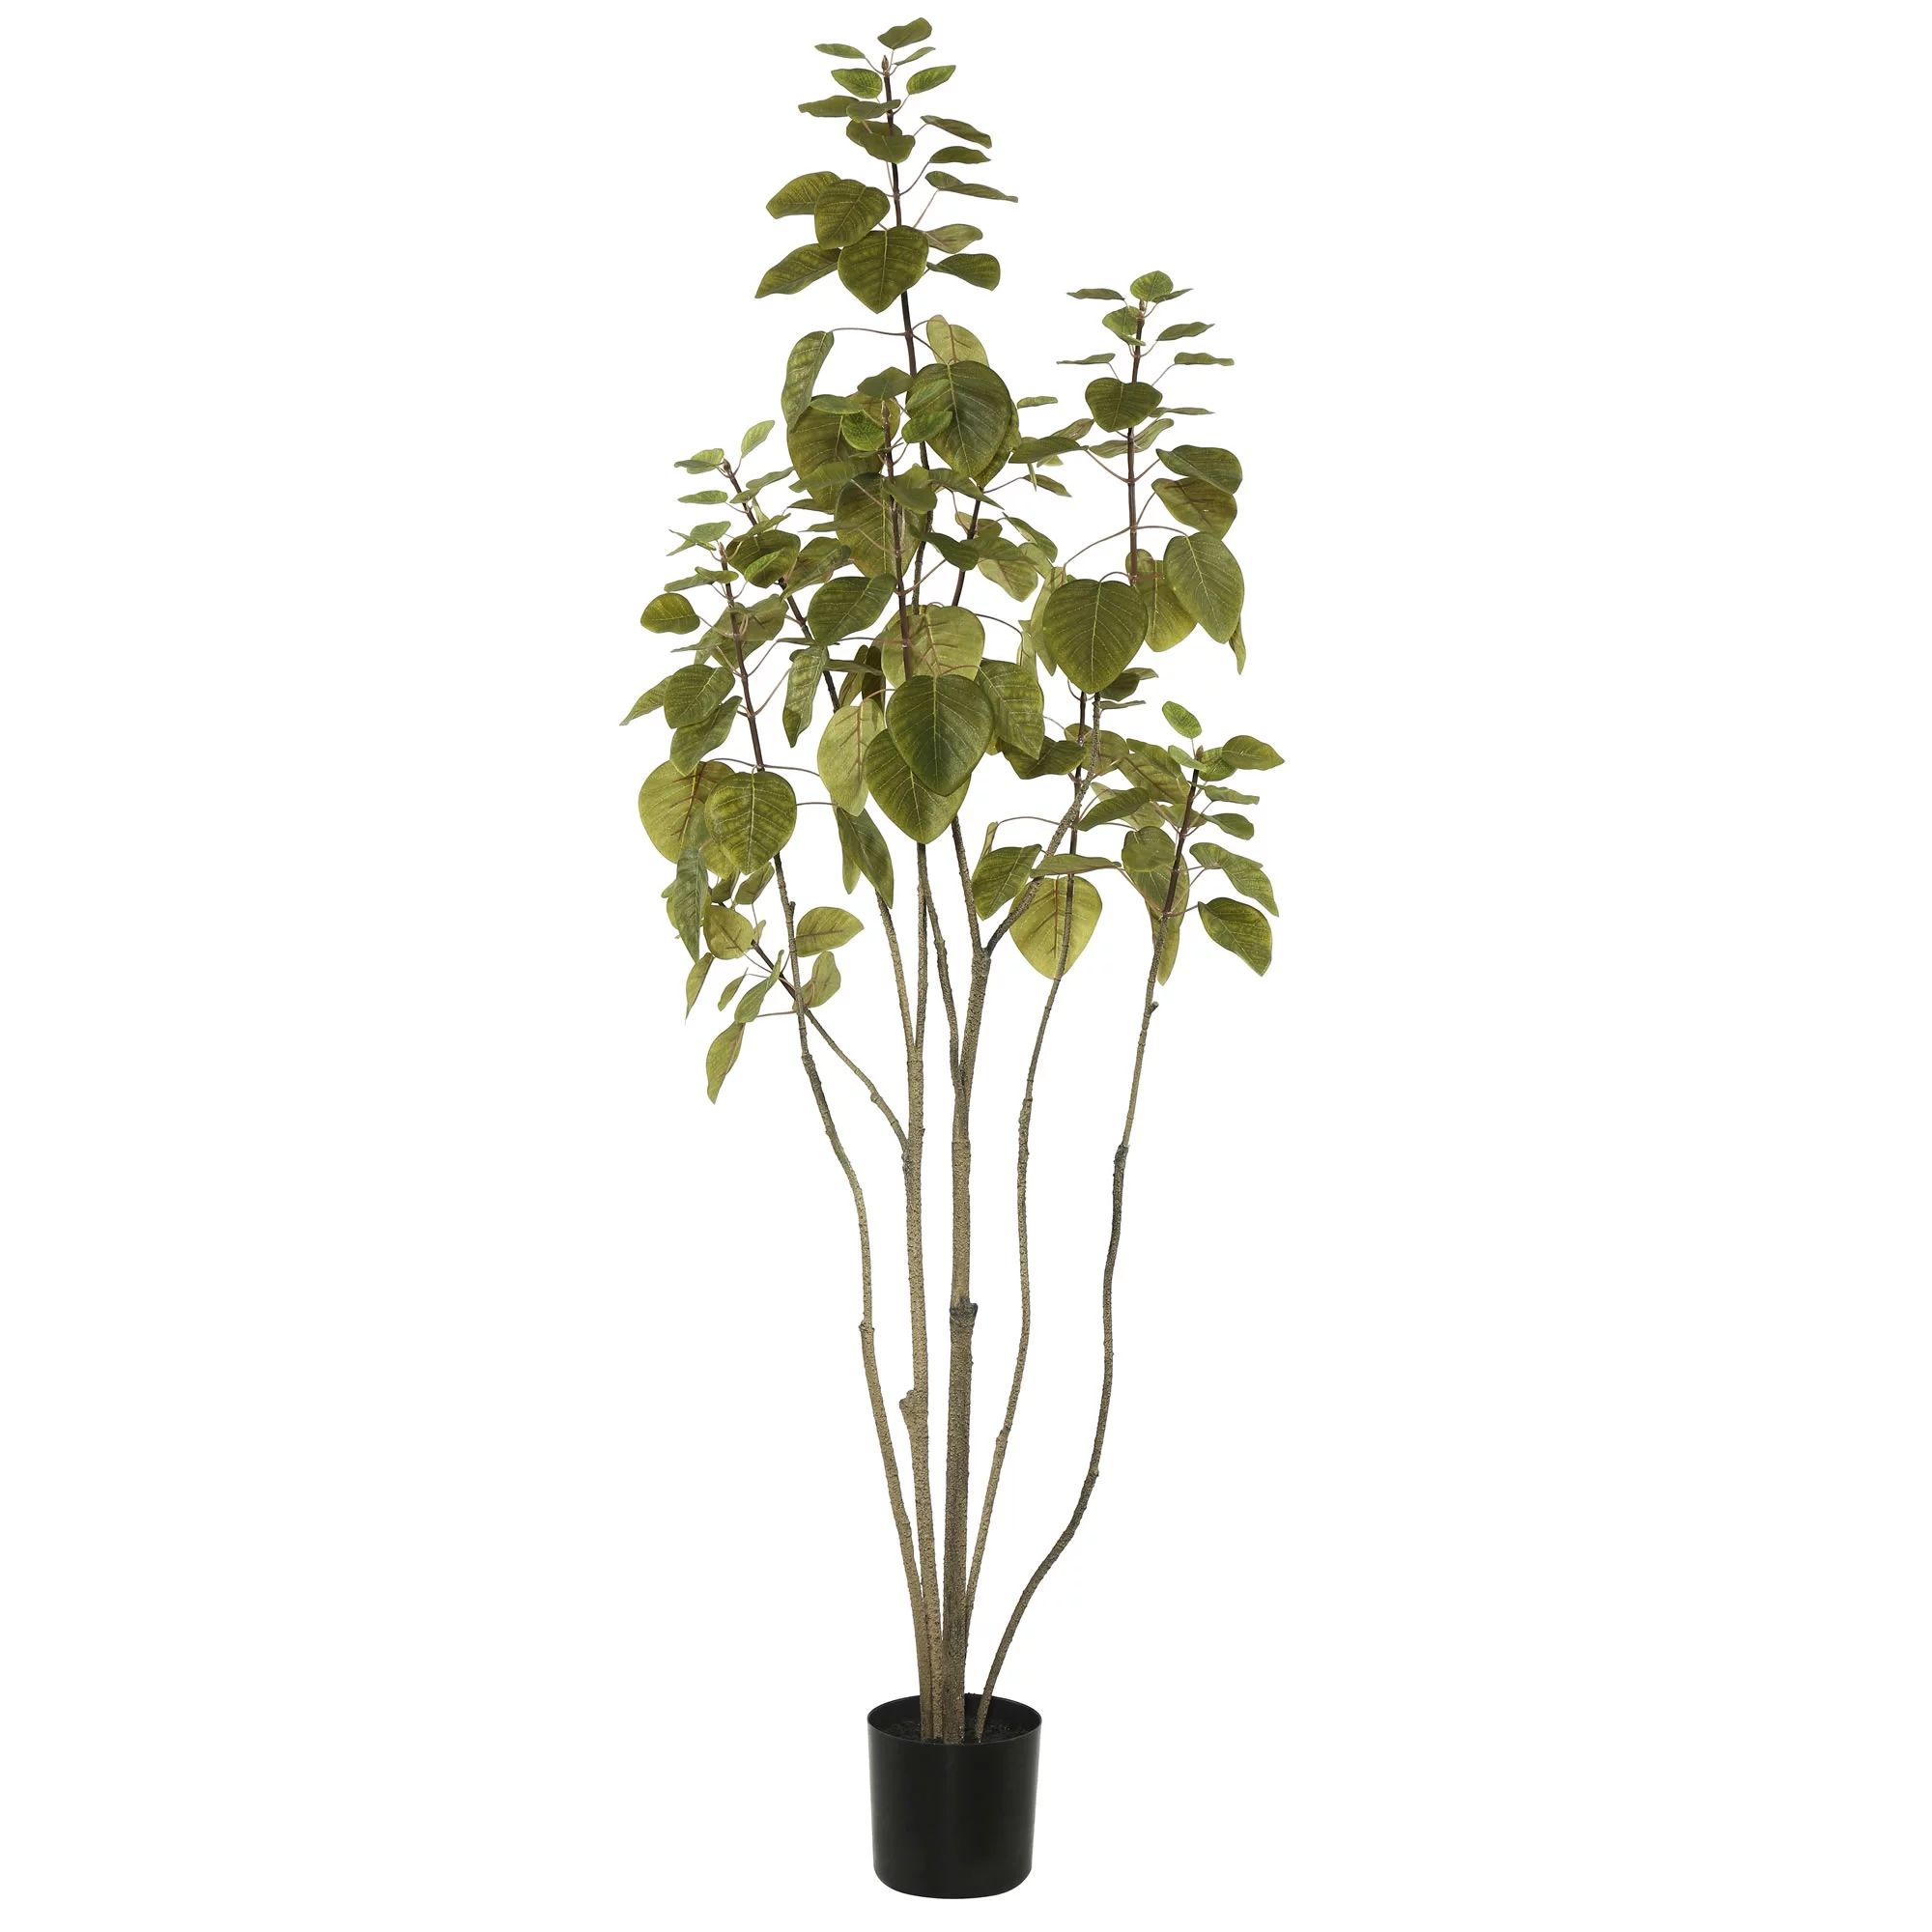 Vickerman 4' Artificial Green Potted Cotinus Coggygria Tree with 177 Leaves | Walmart (US)